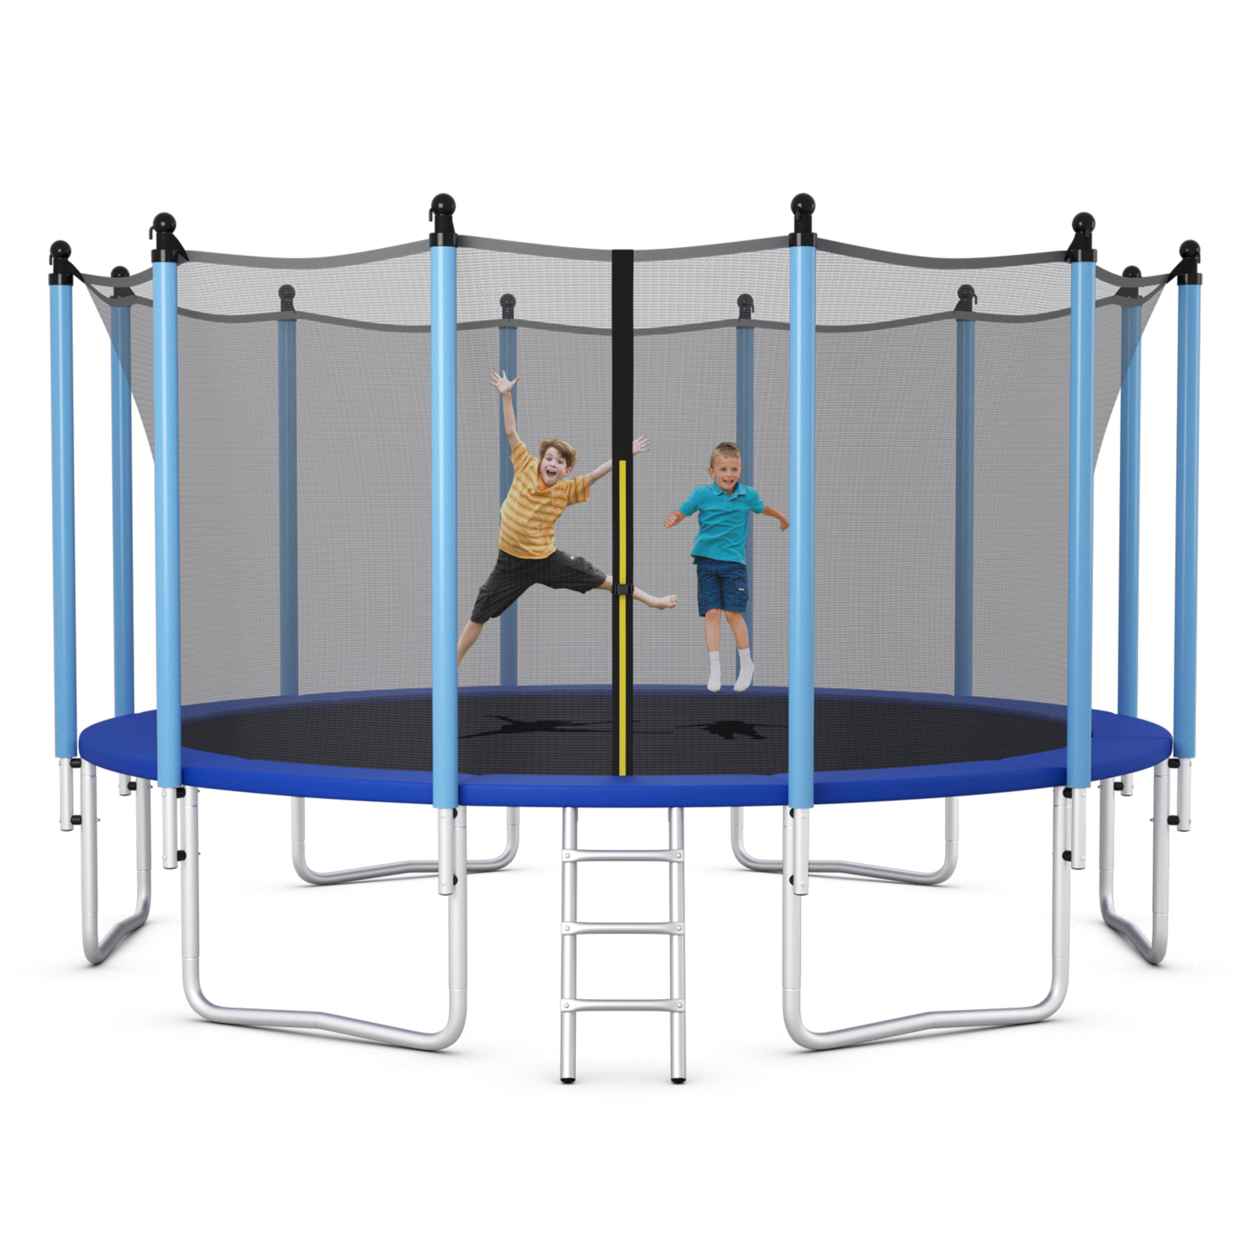 8/10/12/14/15/16FT Jumping Exercise Recreational Bounce Trampoline For Kids W/Safety Enclosure - 16 Ft